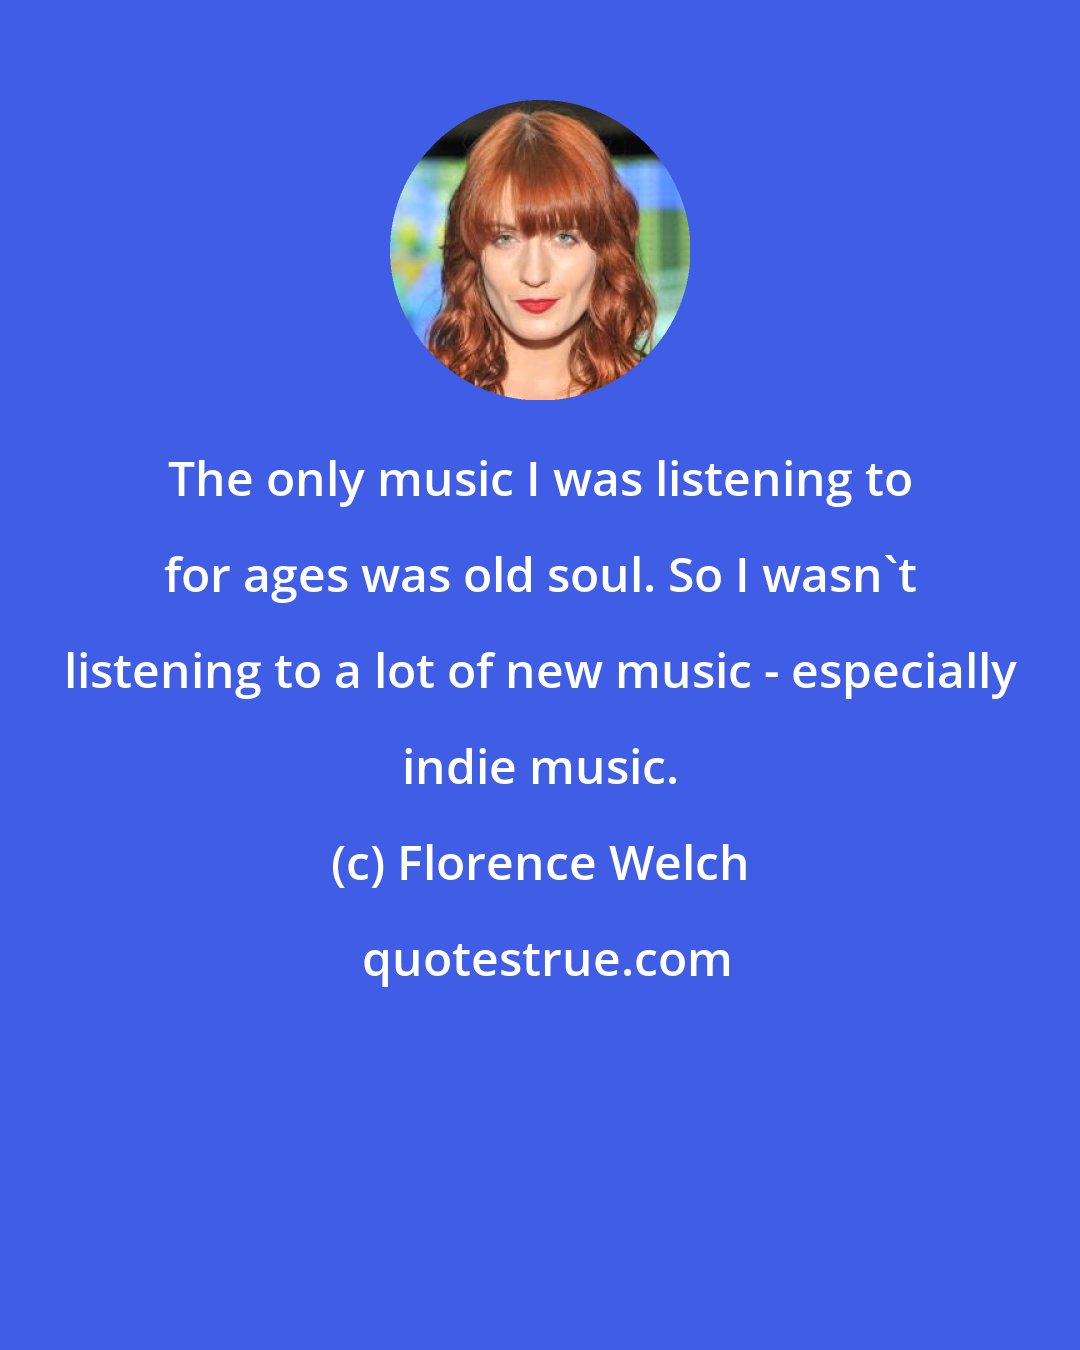 Florence Welch: The only music I was listening to for ages was old soul. So I wasn't listening to a lot of new music - especially indie music.